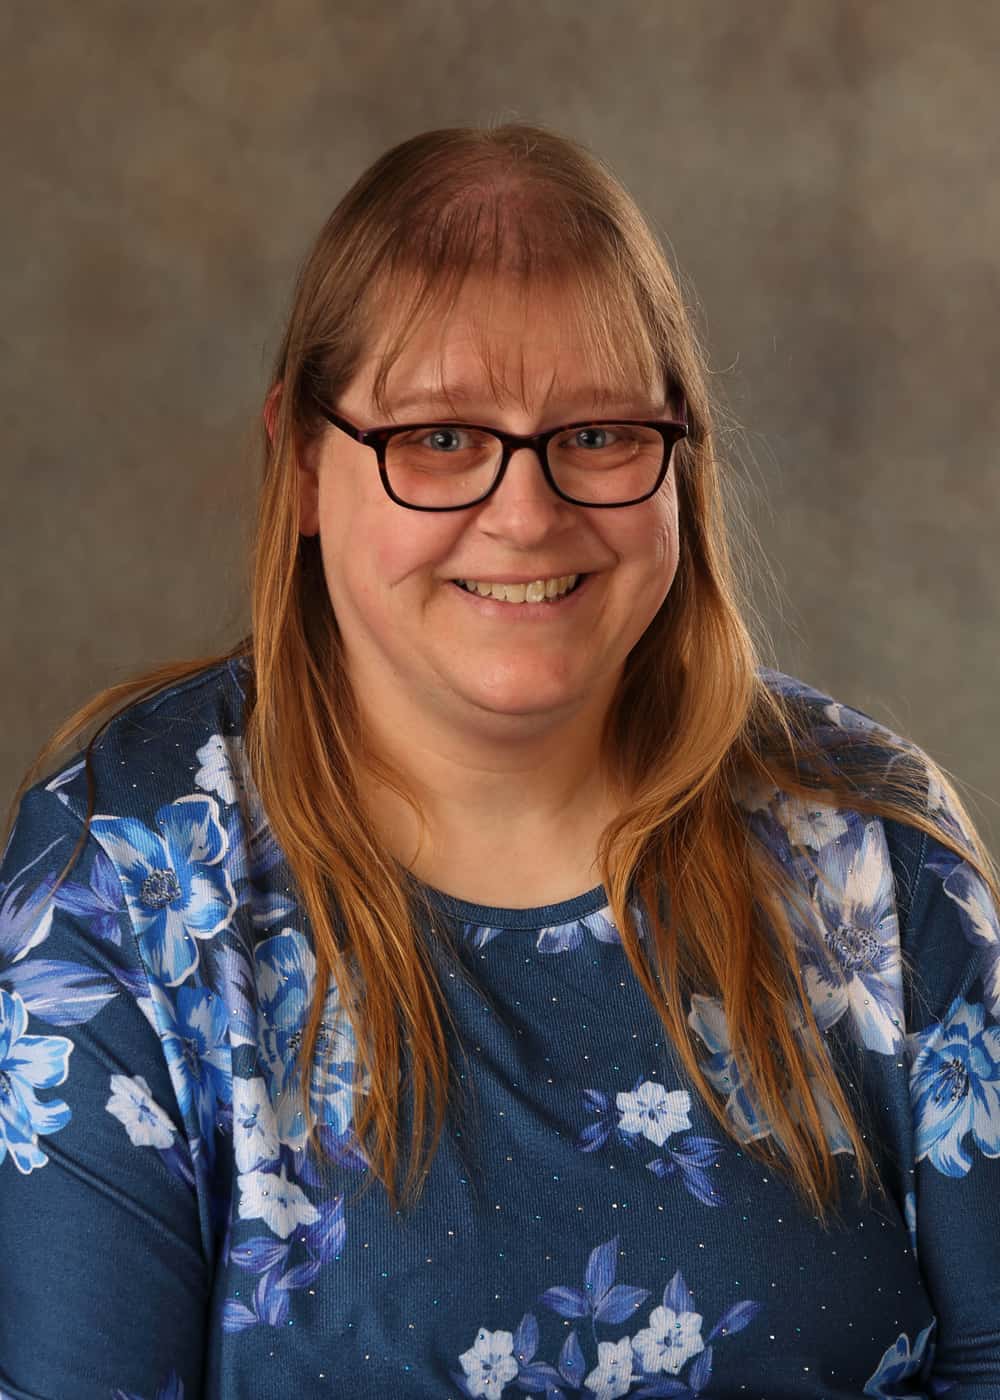 Photo of Lead Teacher Melissa Spaulding. She is a smiling Caucasian woman with long blonde hair, blue eyes, and black-framed glasses. She is wearing a blue shirt with a light blue and white floral pattern.